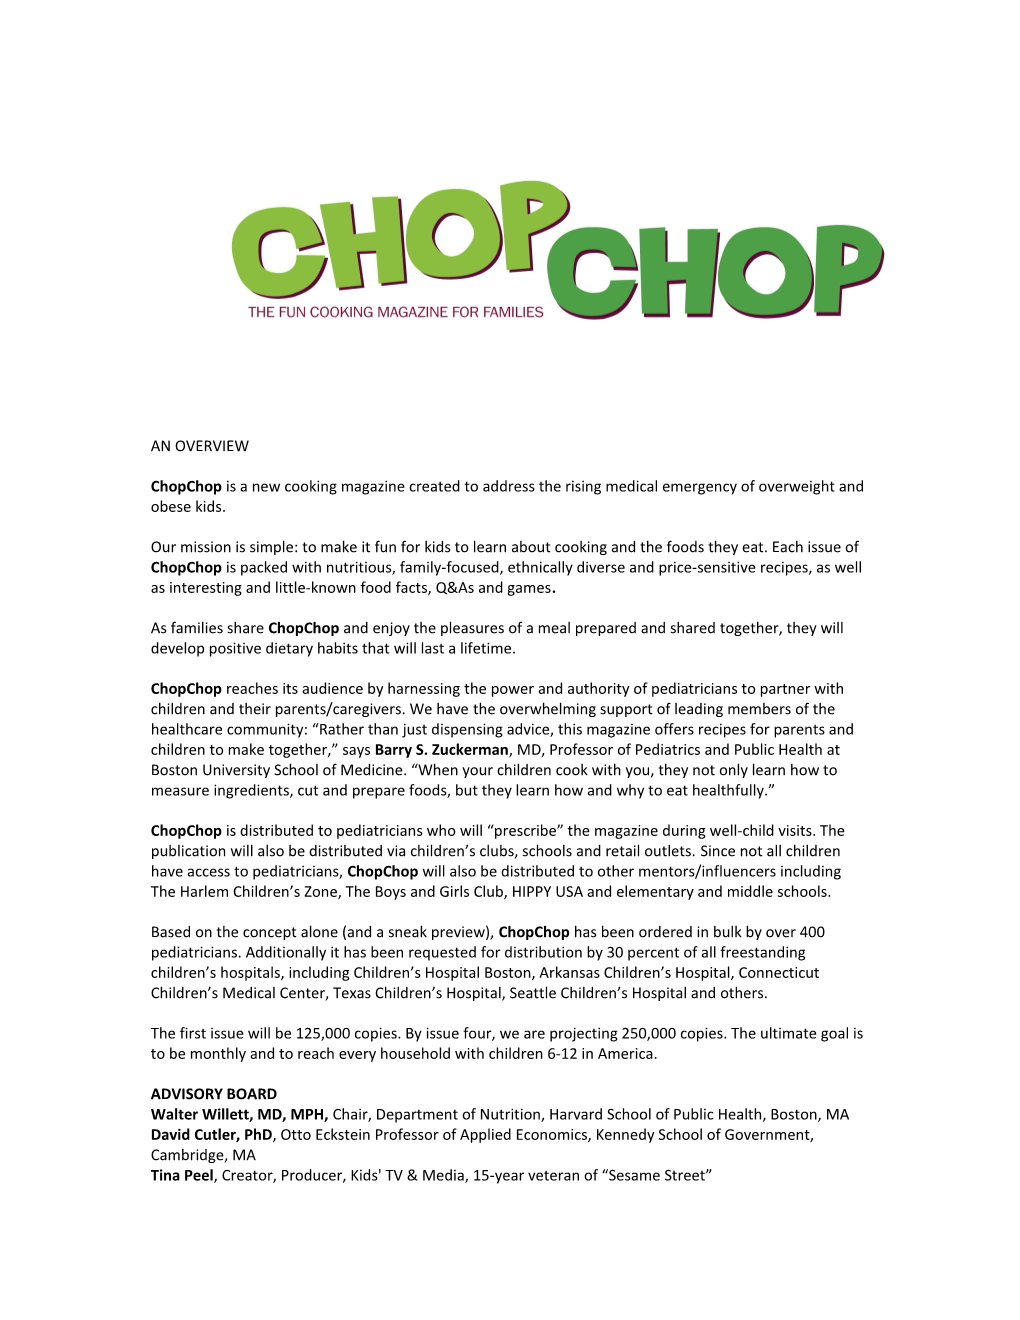 Chopchop the Fun Cooking Magazine for Kids